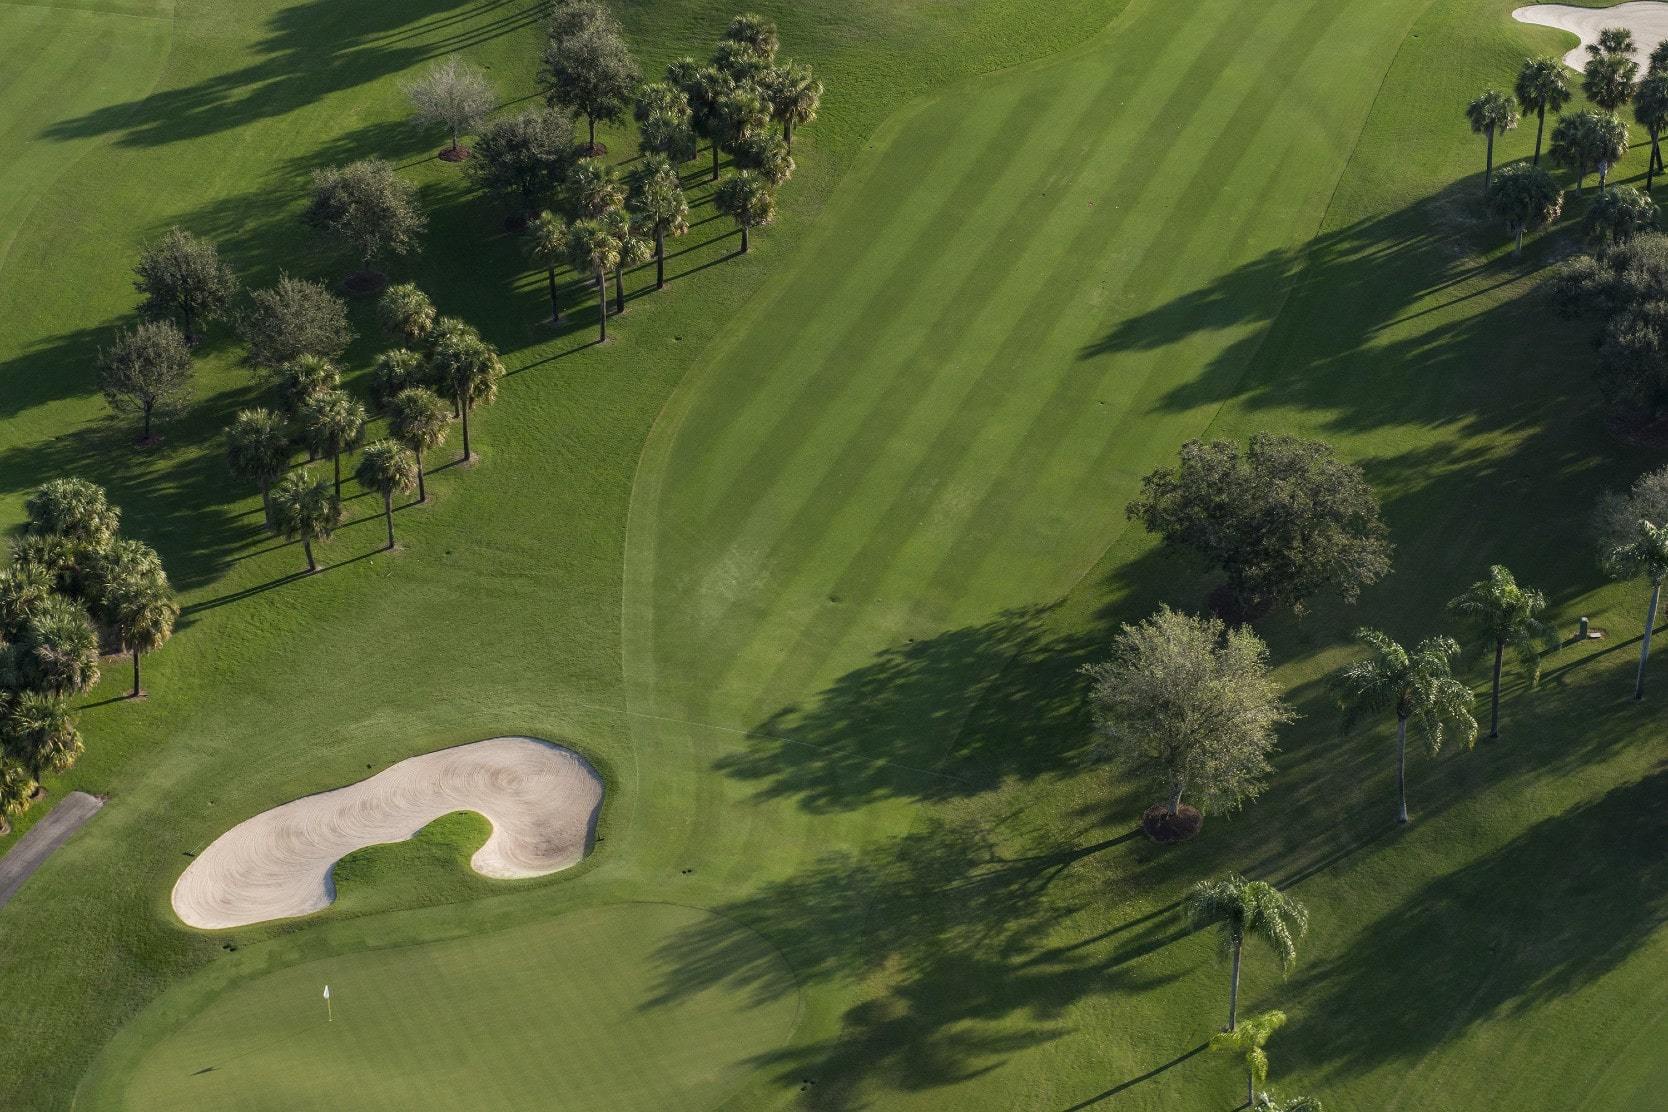 Aerial view of a golf course in Palm Beach Gardens, Florida